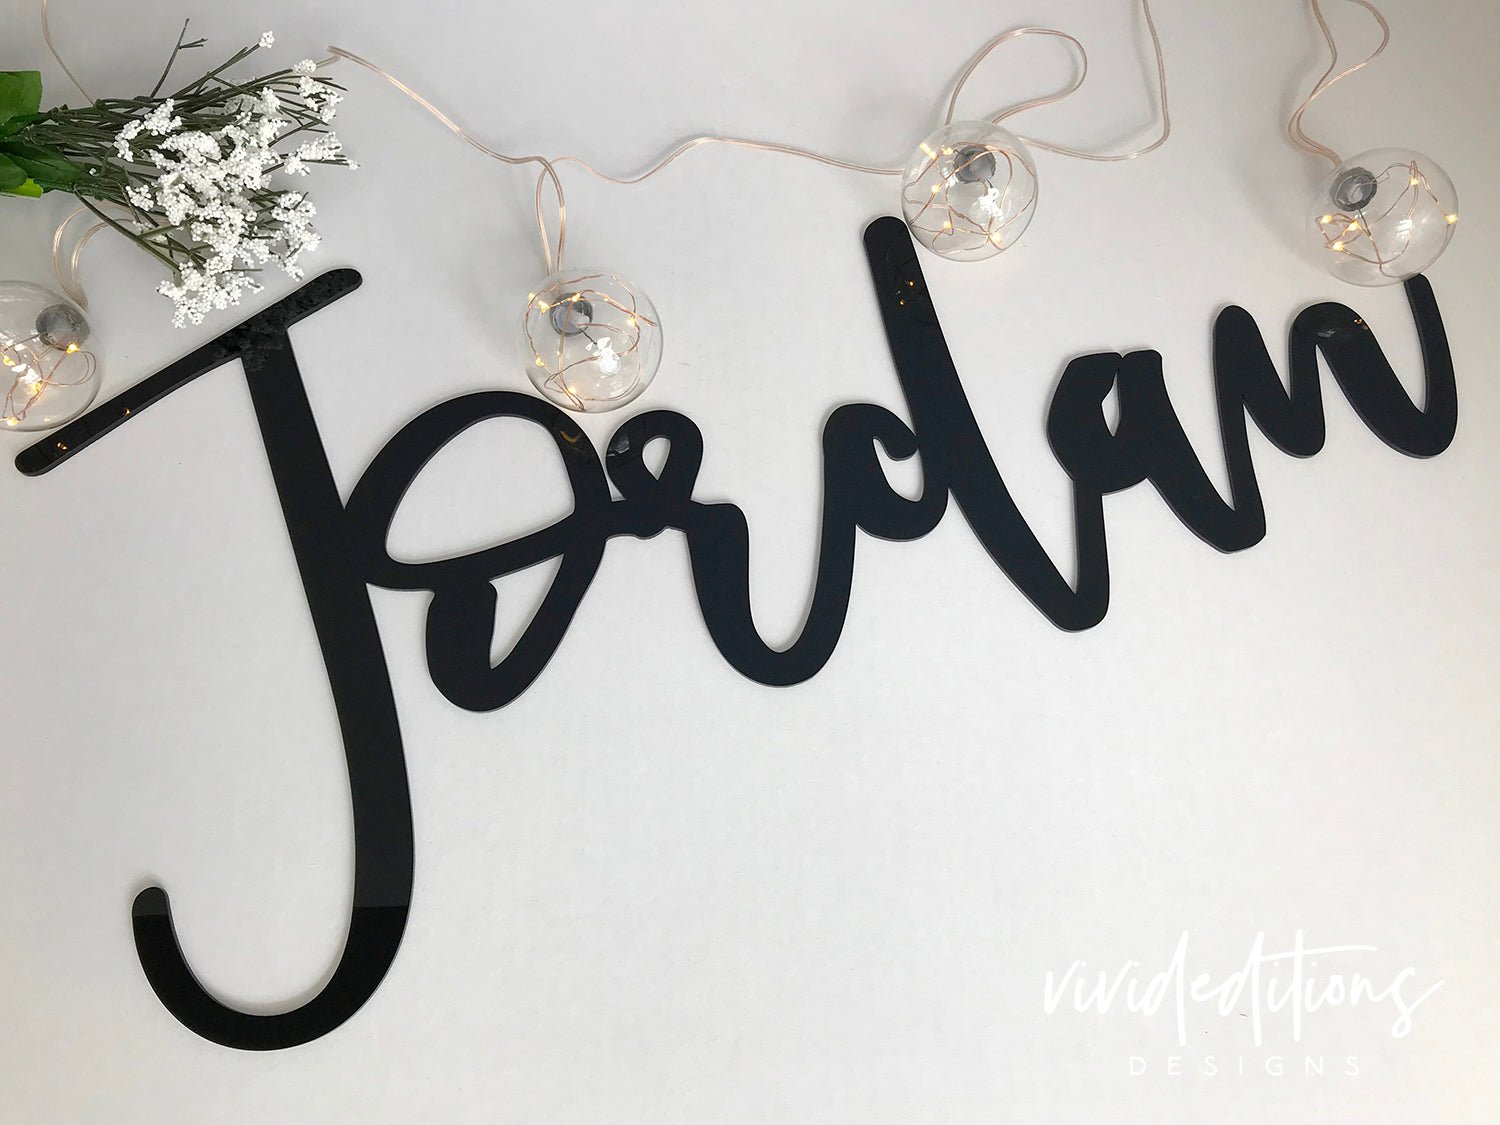 18” Gold Mirror Small Personalized Name Sign - VividEditions